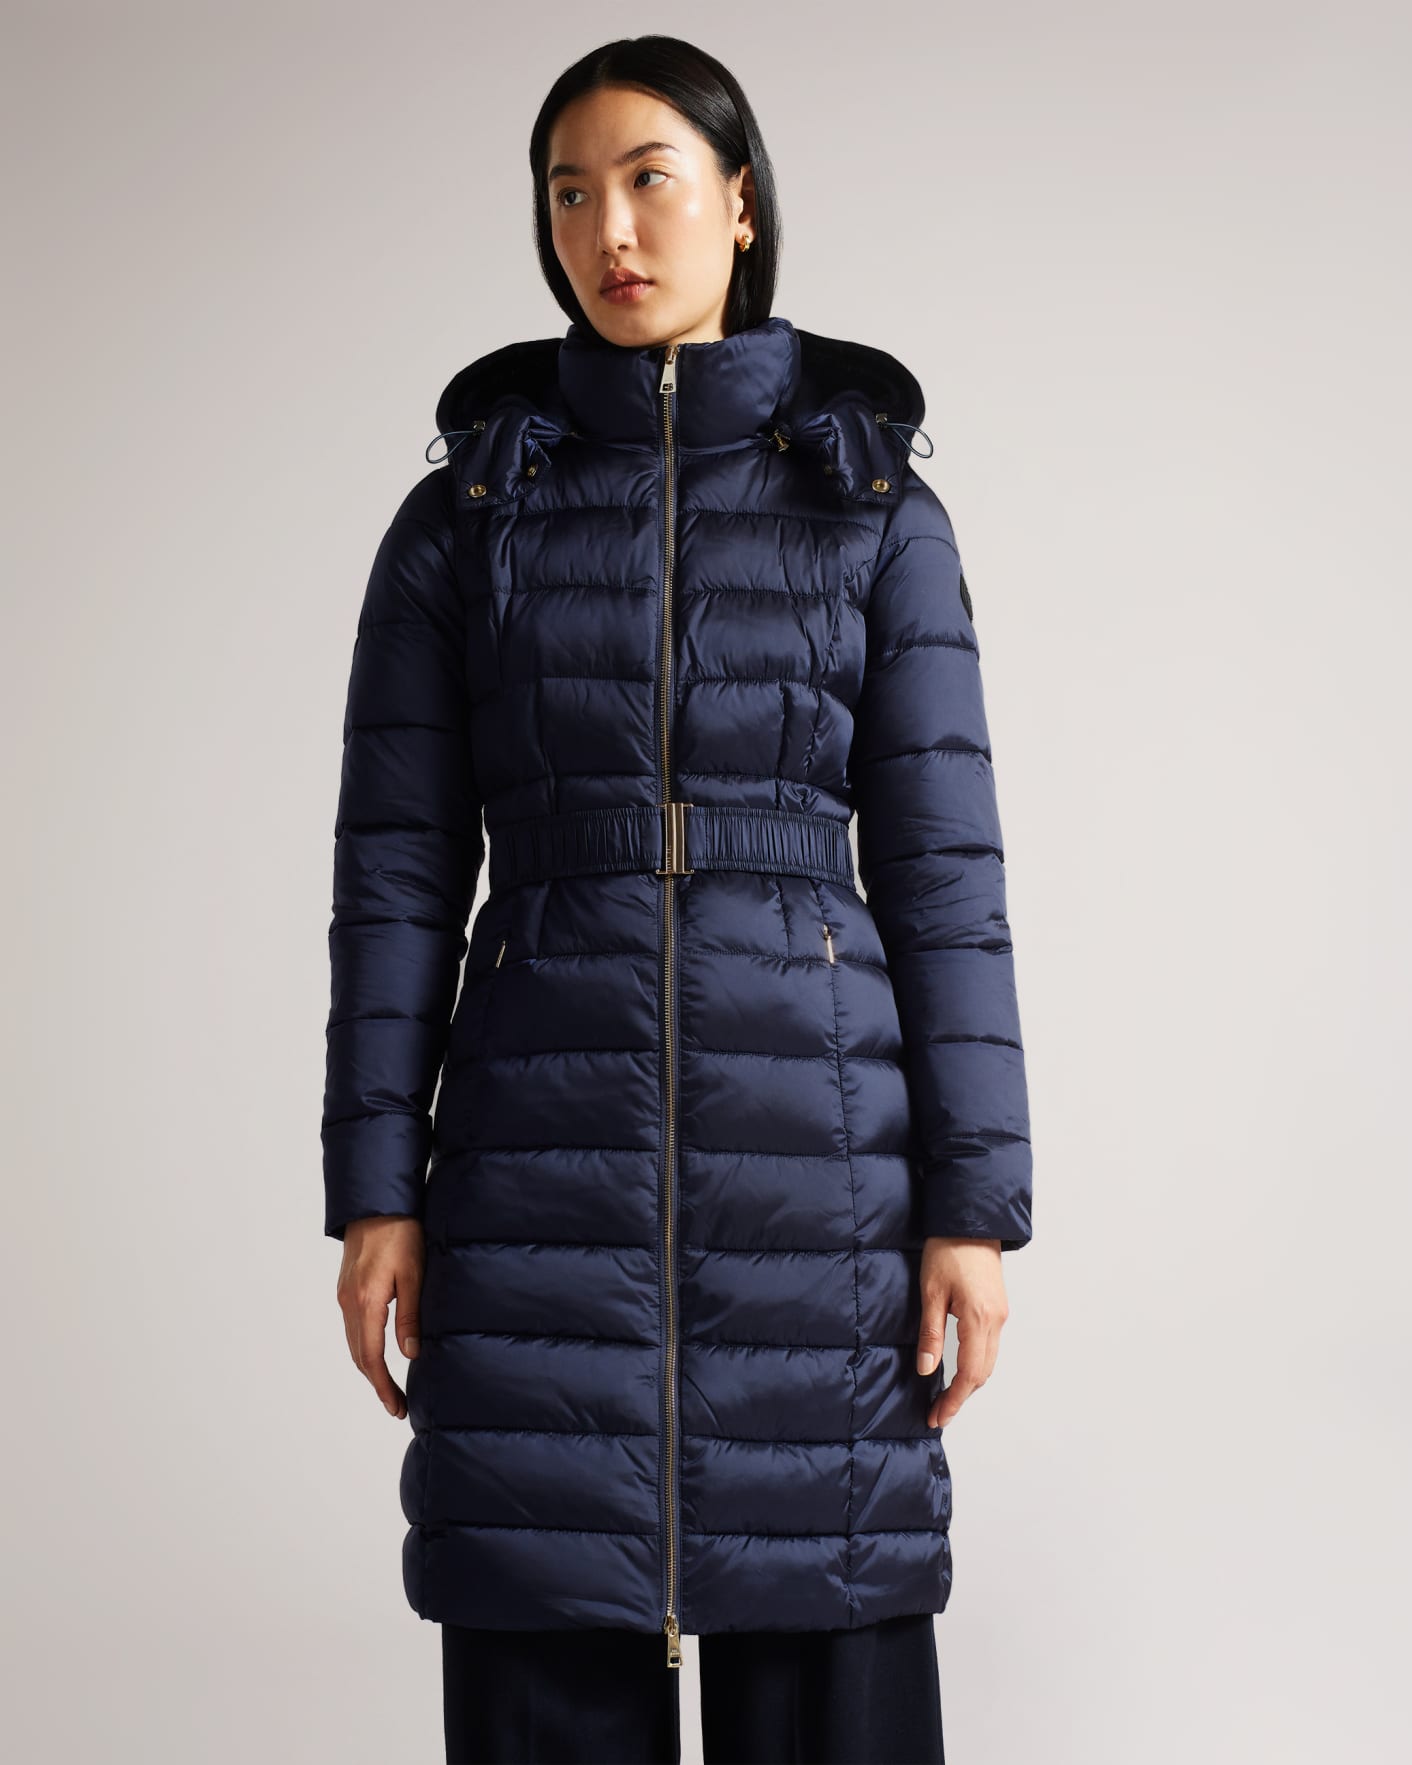 Womens Navy Padded Jacket With Hood | lupon.gov.ph